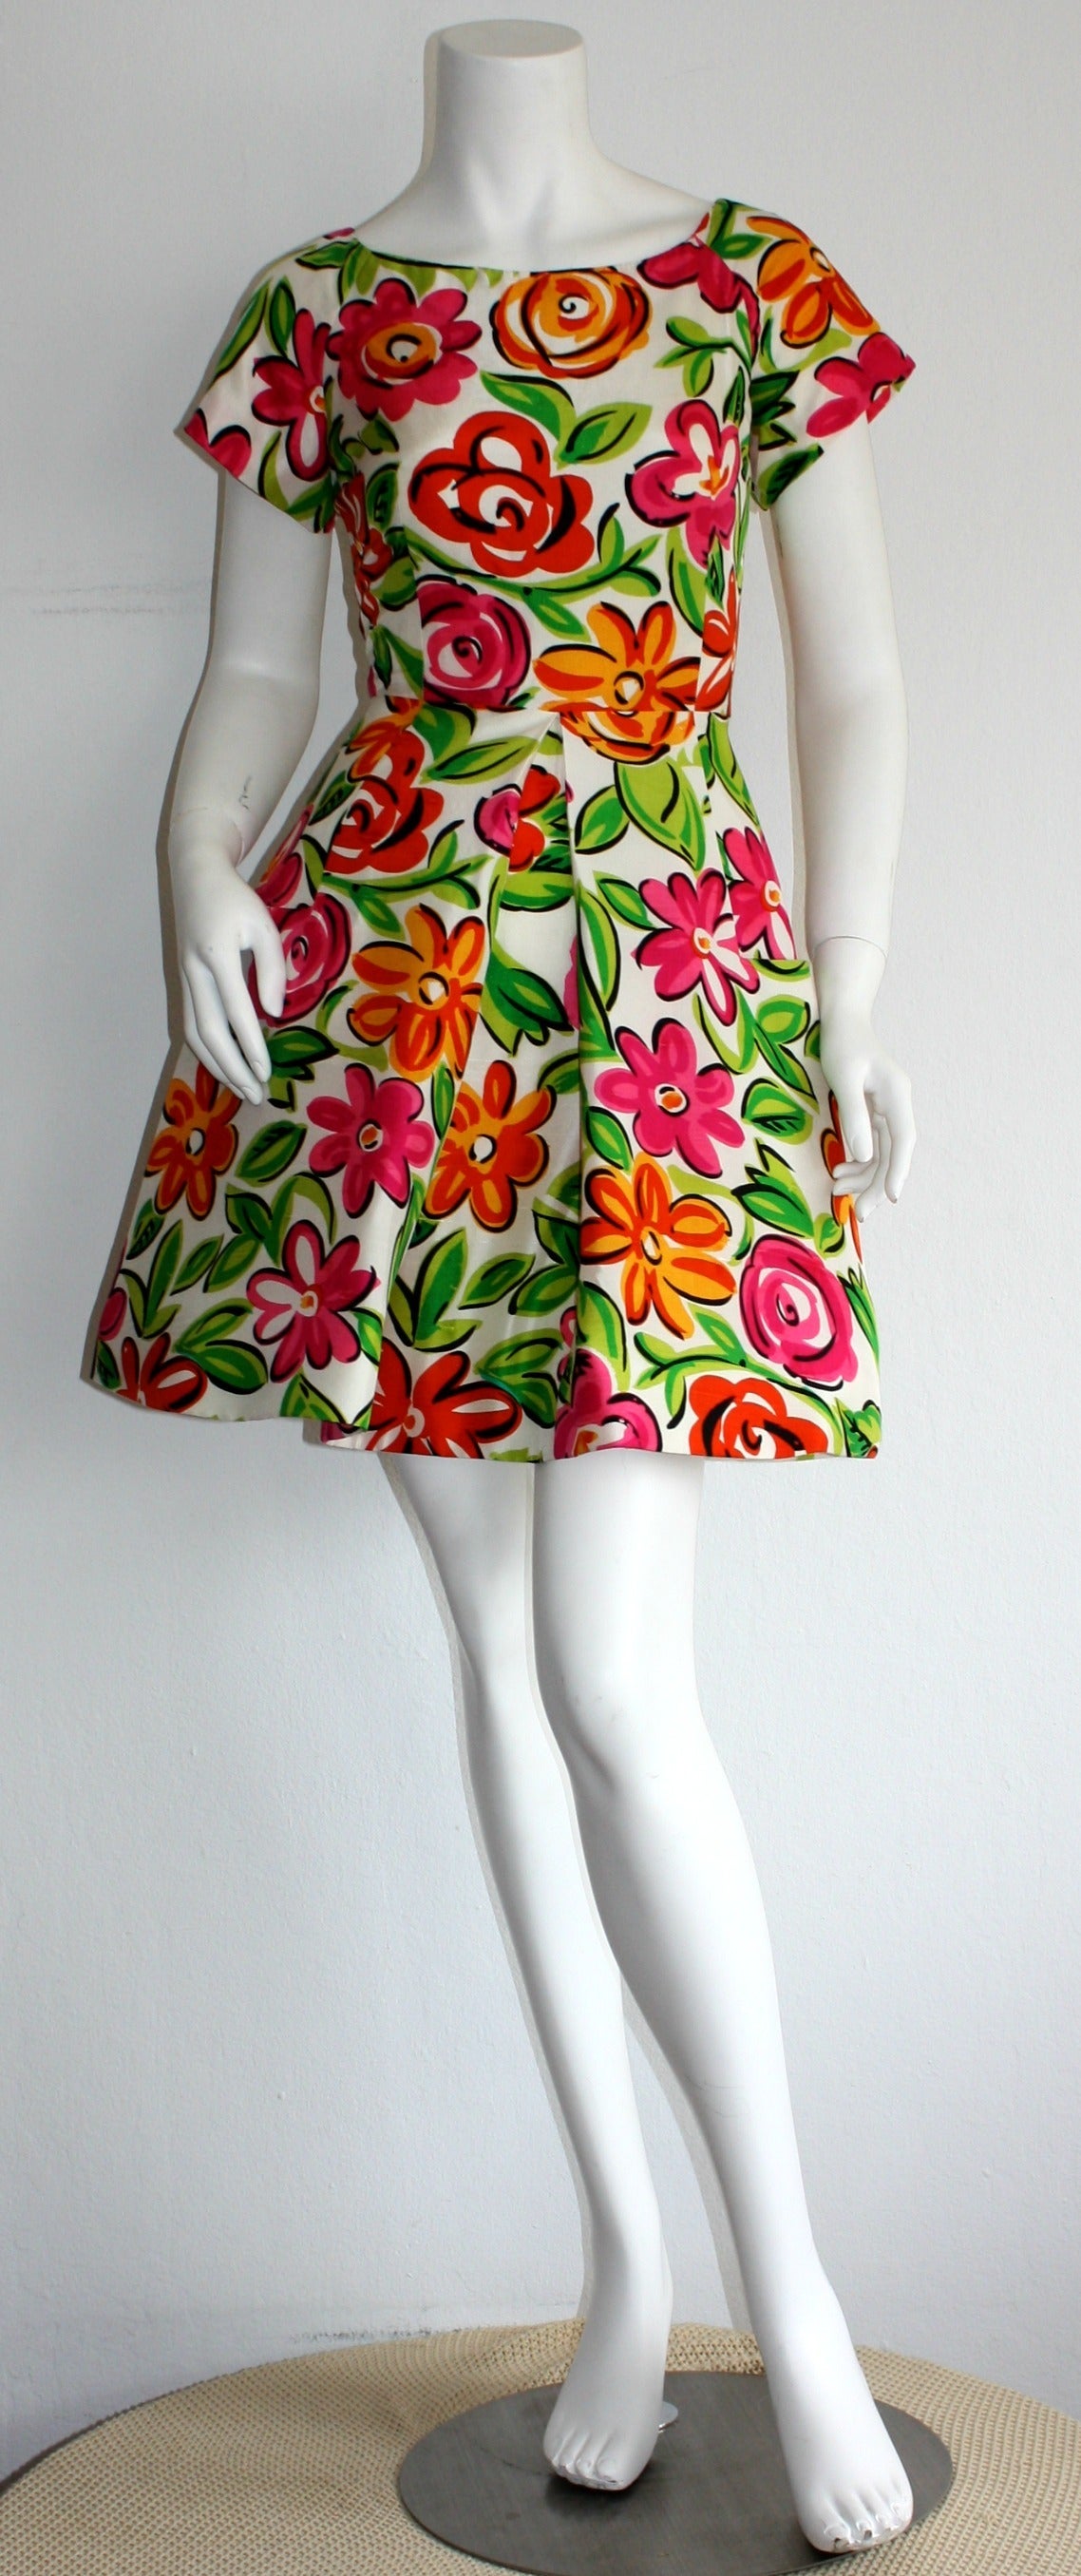 Adorable vintage Scaasi 1990s dress! Chic all-over floral print in vibrant hues of pink, orange, green and white. Wonderful high-quality silk. 'Pouf skirt' features braided horsehair inside hem for an extra flared skirt. Chic oversized pockets on